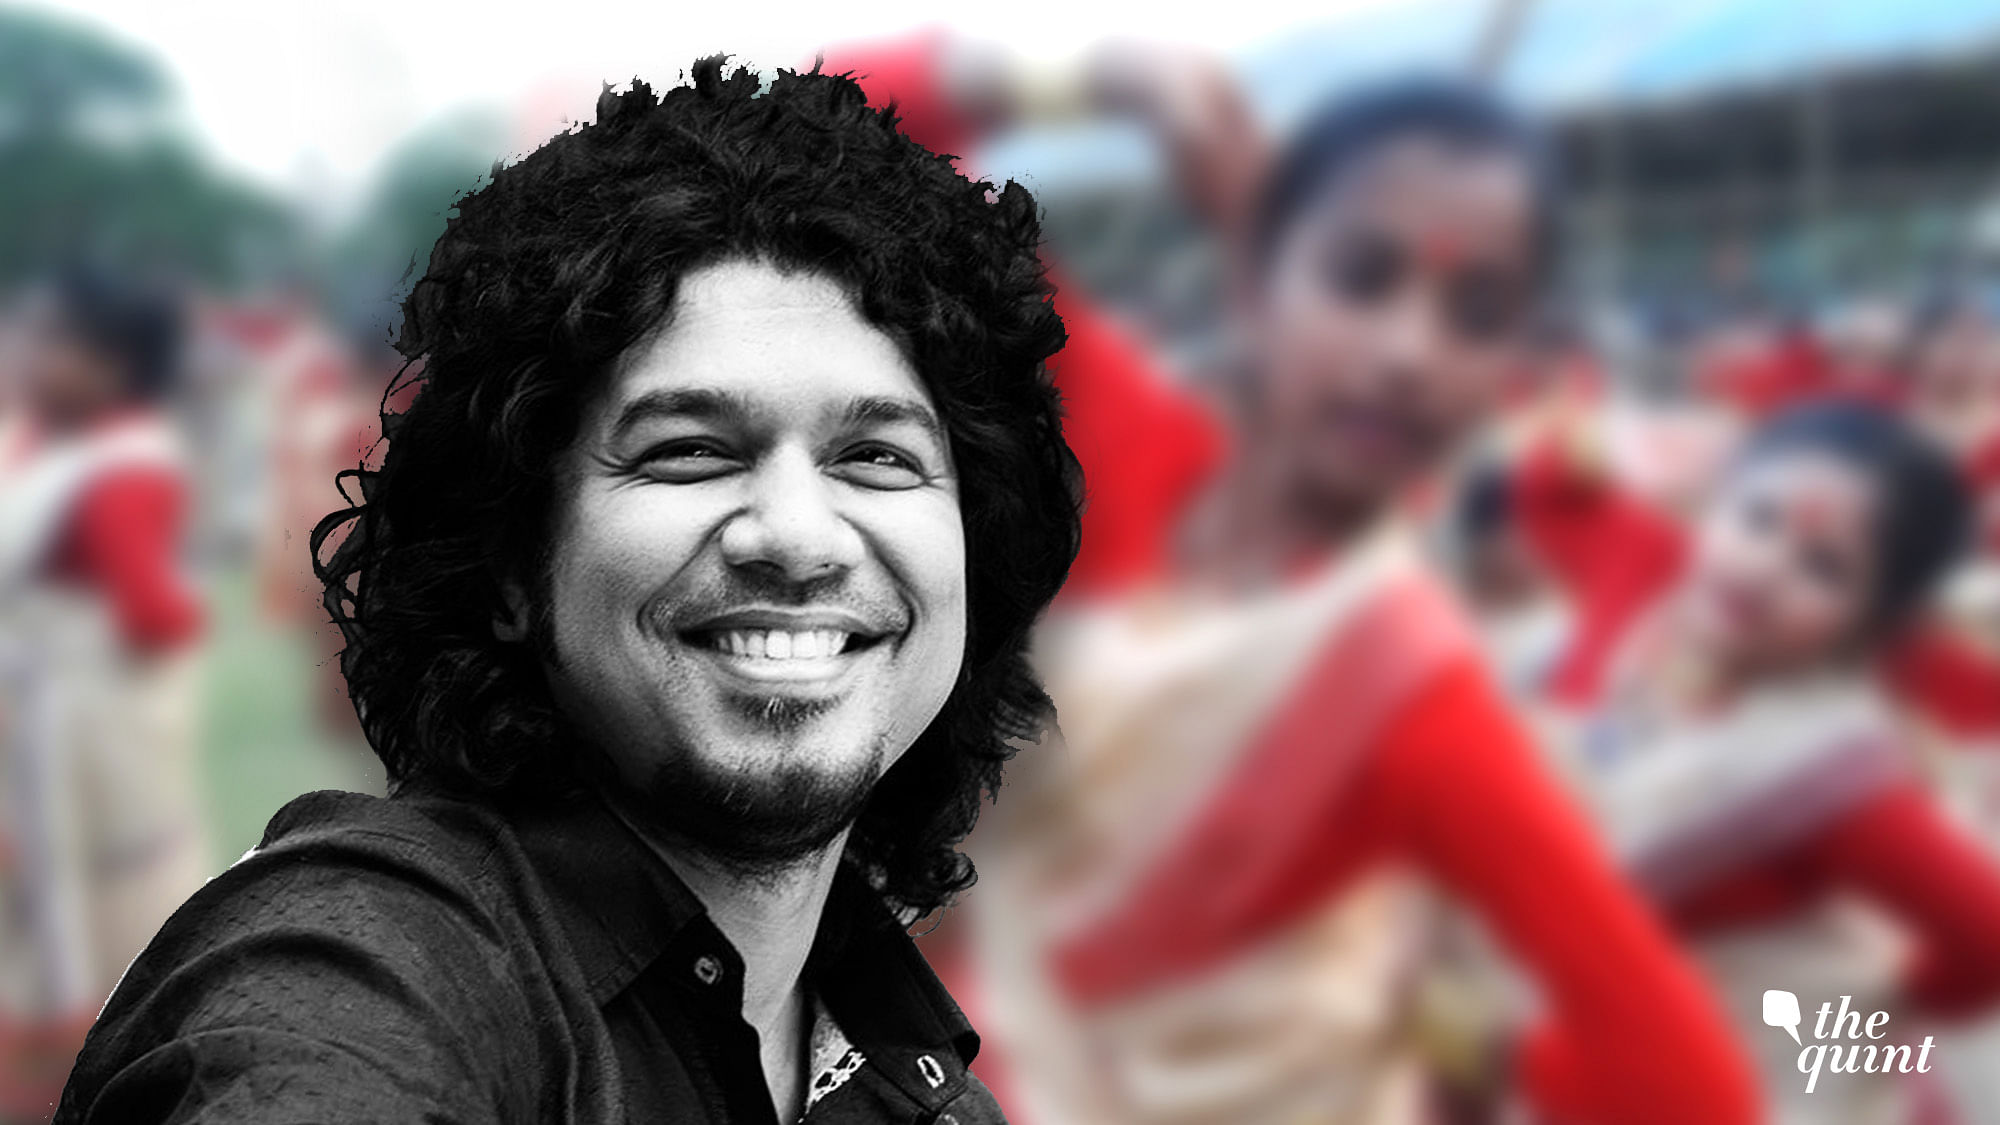 Papon has been away from the limelight after allegation of sexual misconduct with a minor.